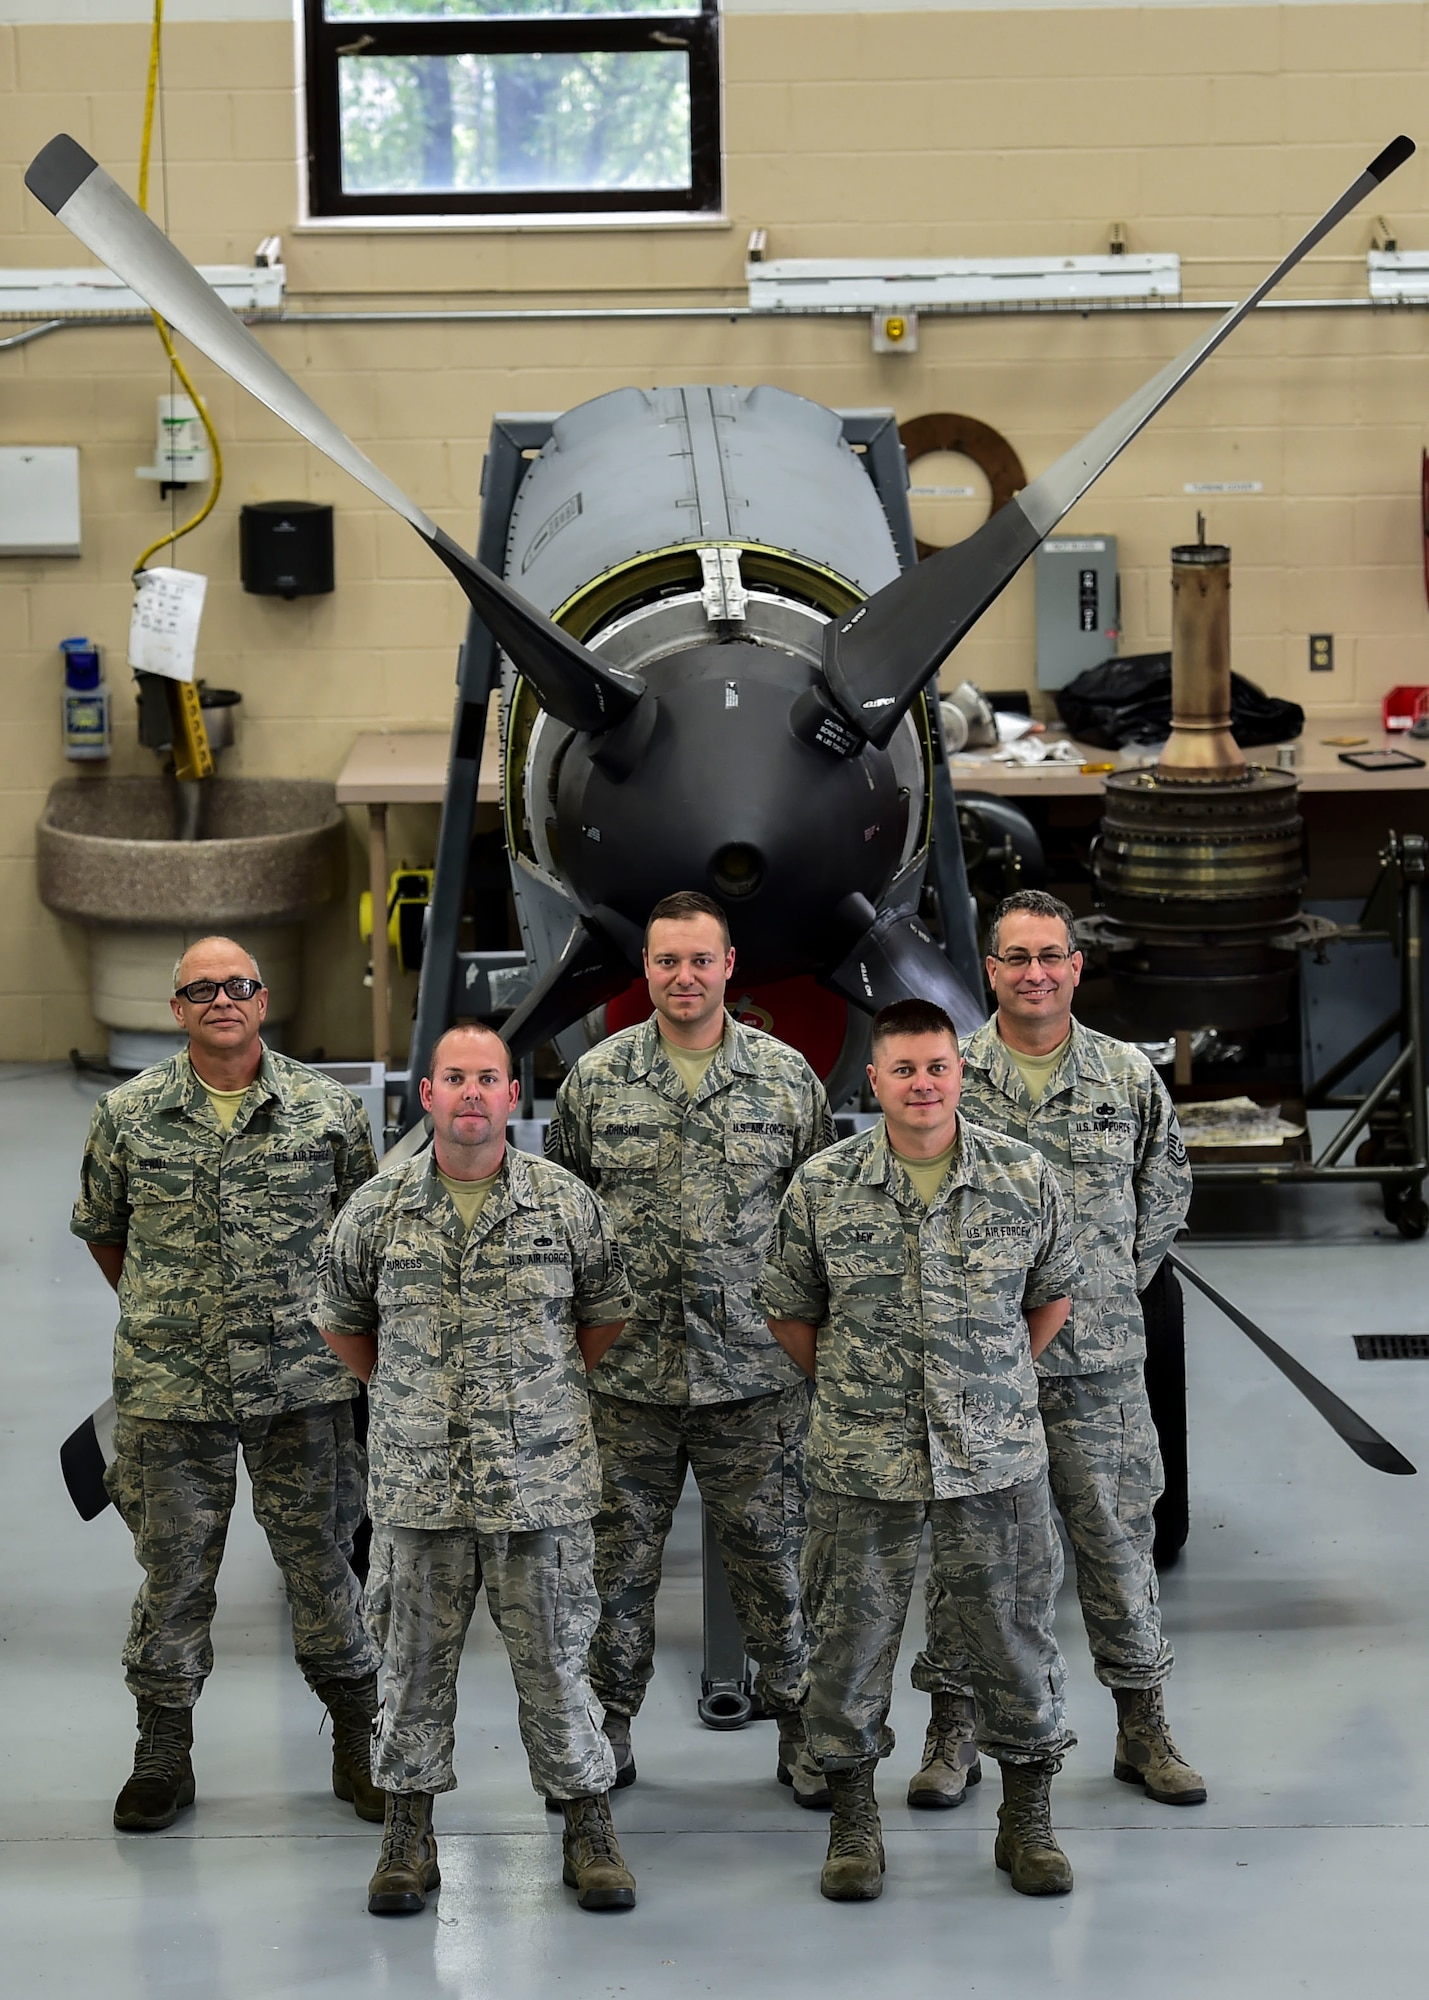 Citizen Airmen from the 910th Maintenance Squadron’s propulsion shop here, pose for a photo in front of an Allison T56-A-15 turboprop engine here, July 6, 2017. (From Left) Master Sgt. Ben Sewall, Tech. Sgt. Jeff Burgess, Master Sgt. James Johnson, Tech. Sgt. Steve Lew and Senior Master Sgt. Bob Pierce are pictured. (U.S. Air Force Photo/Senior Airman Jeffrey Grossi)
